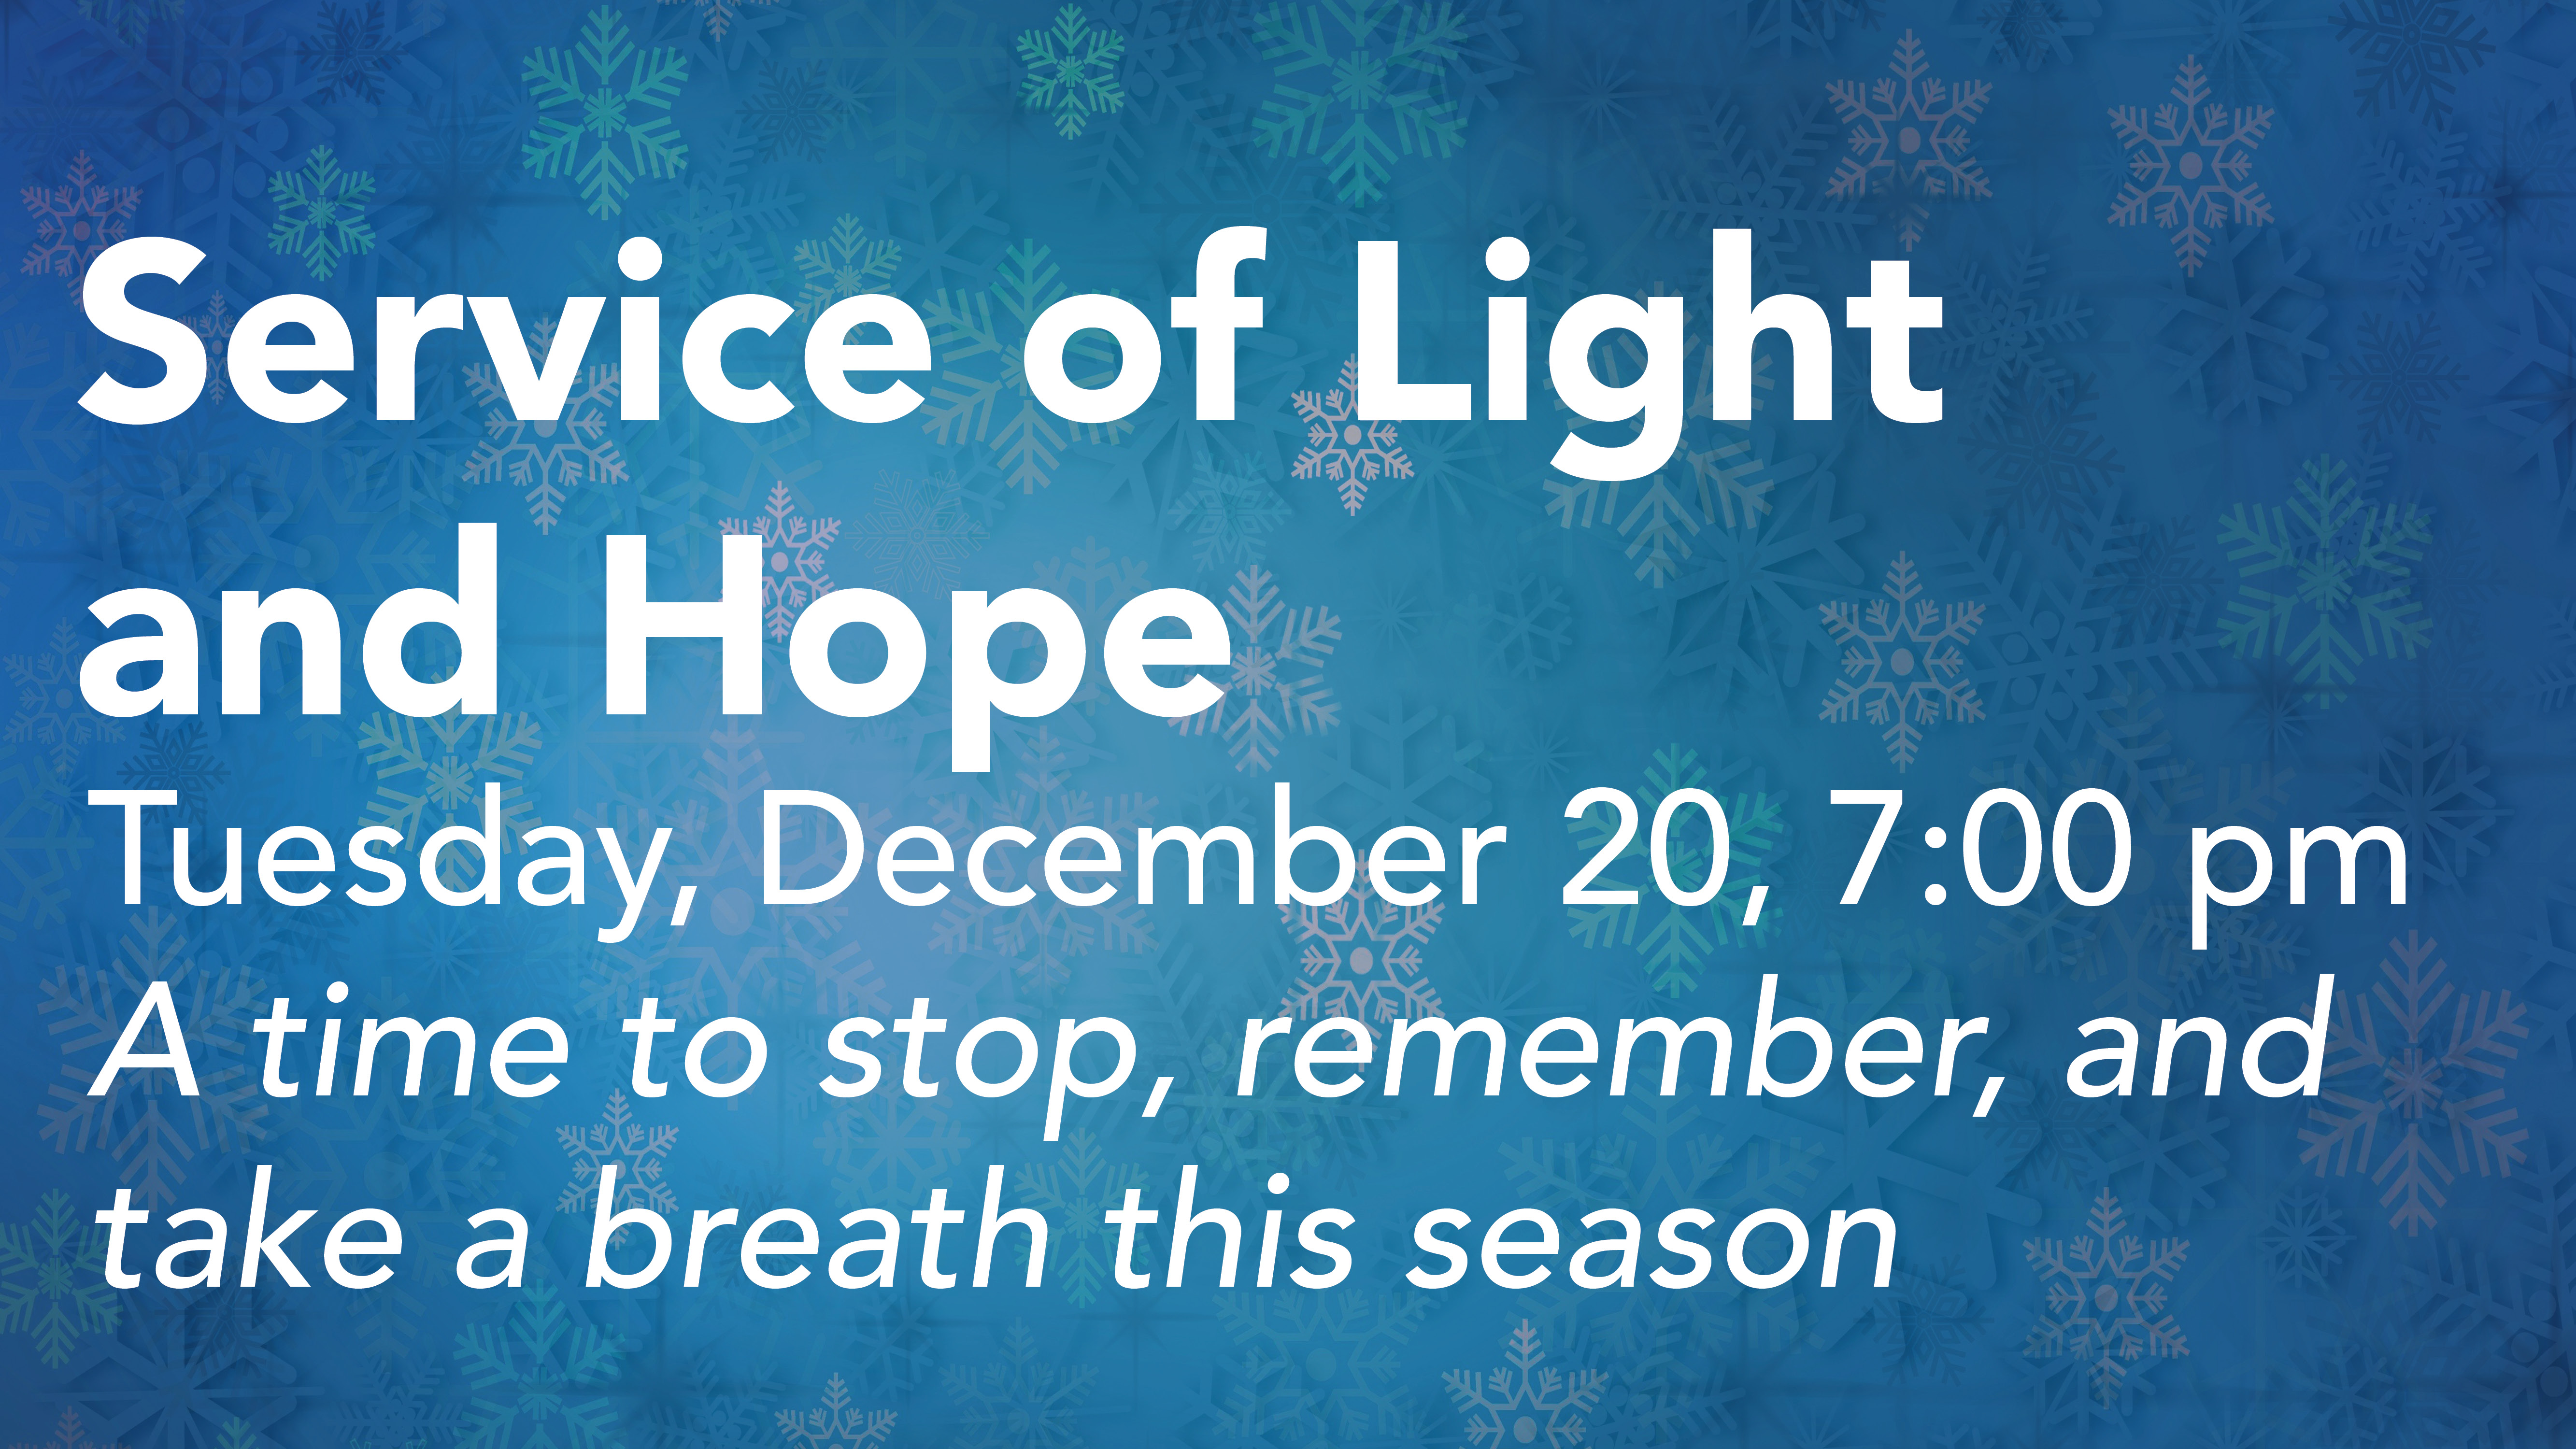 Announcement slide - Service of Light and Hope